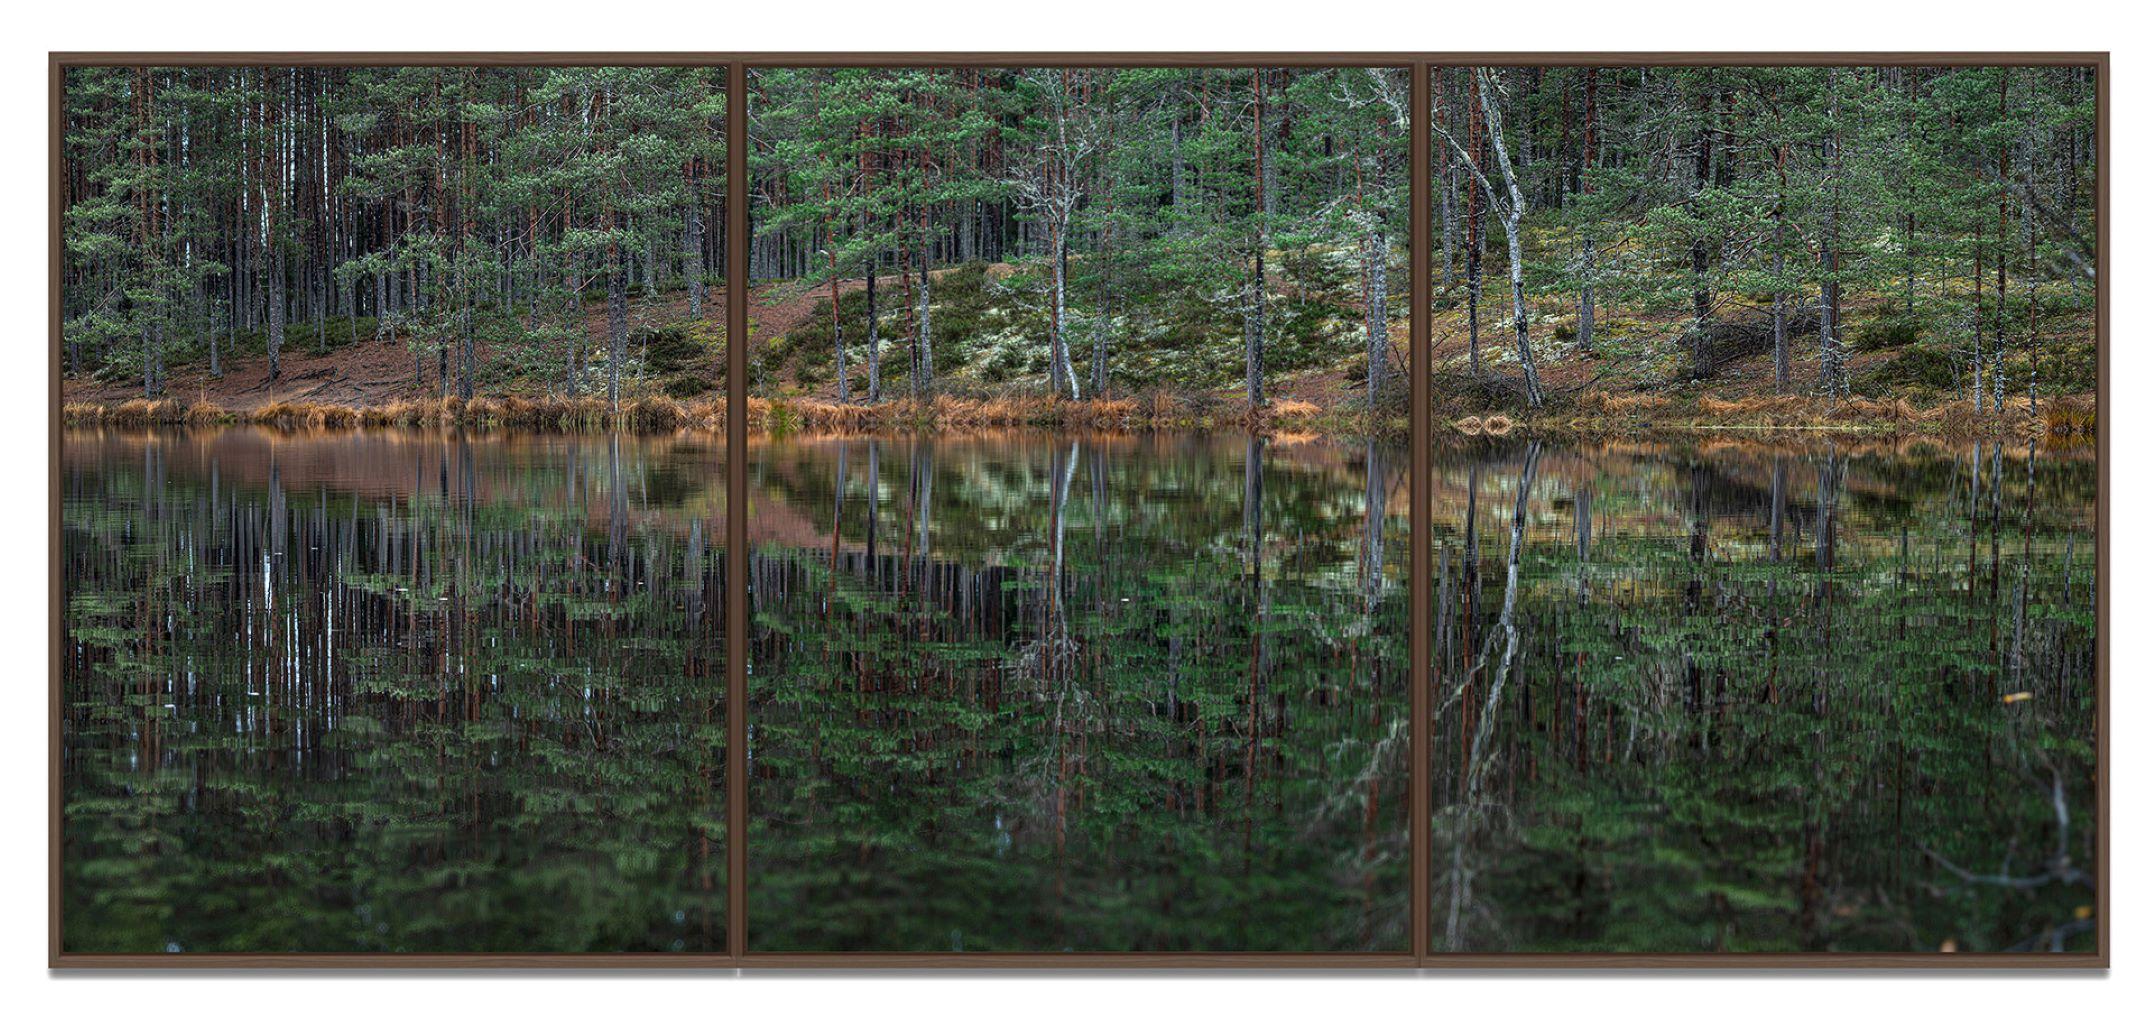 Deep Mirroring Forest 015 by Bernhard Lang - Landscape photography, trees, green For Sale 3